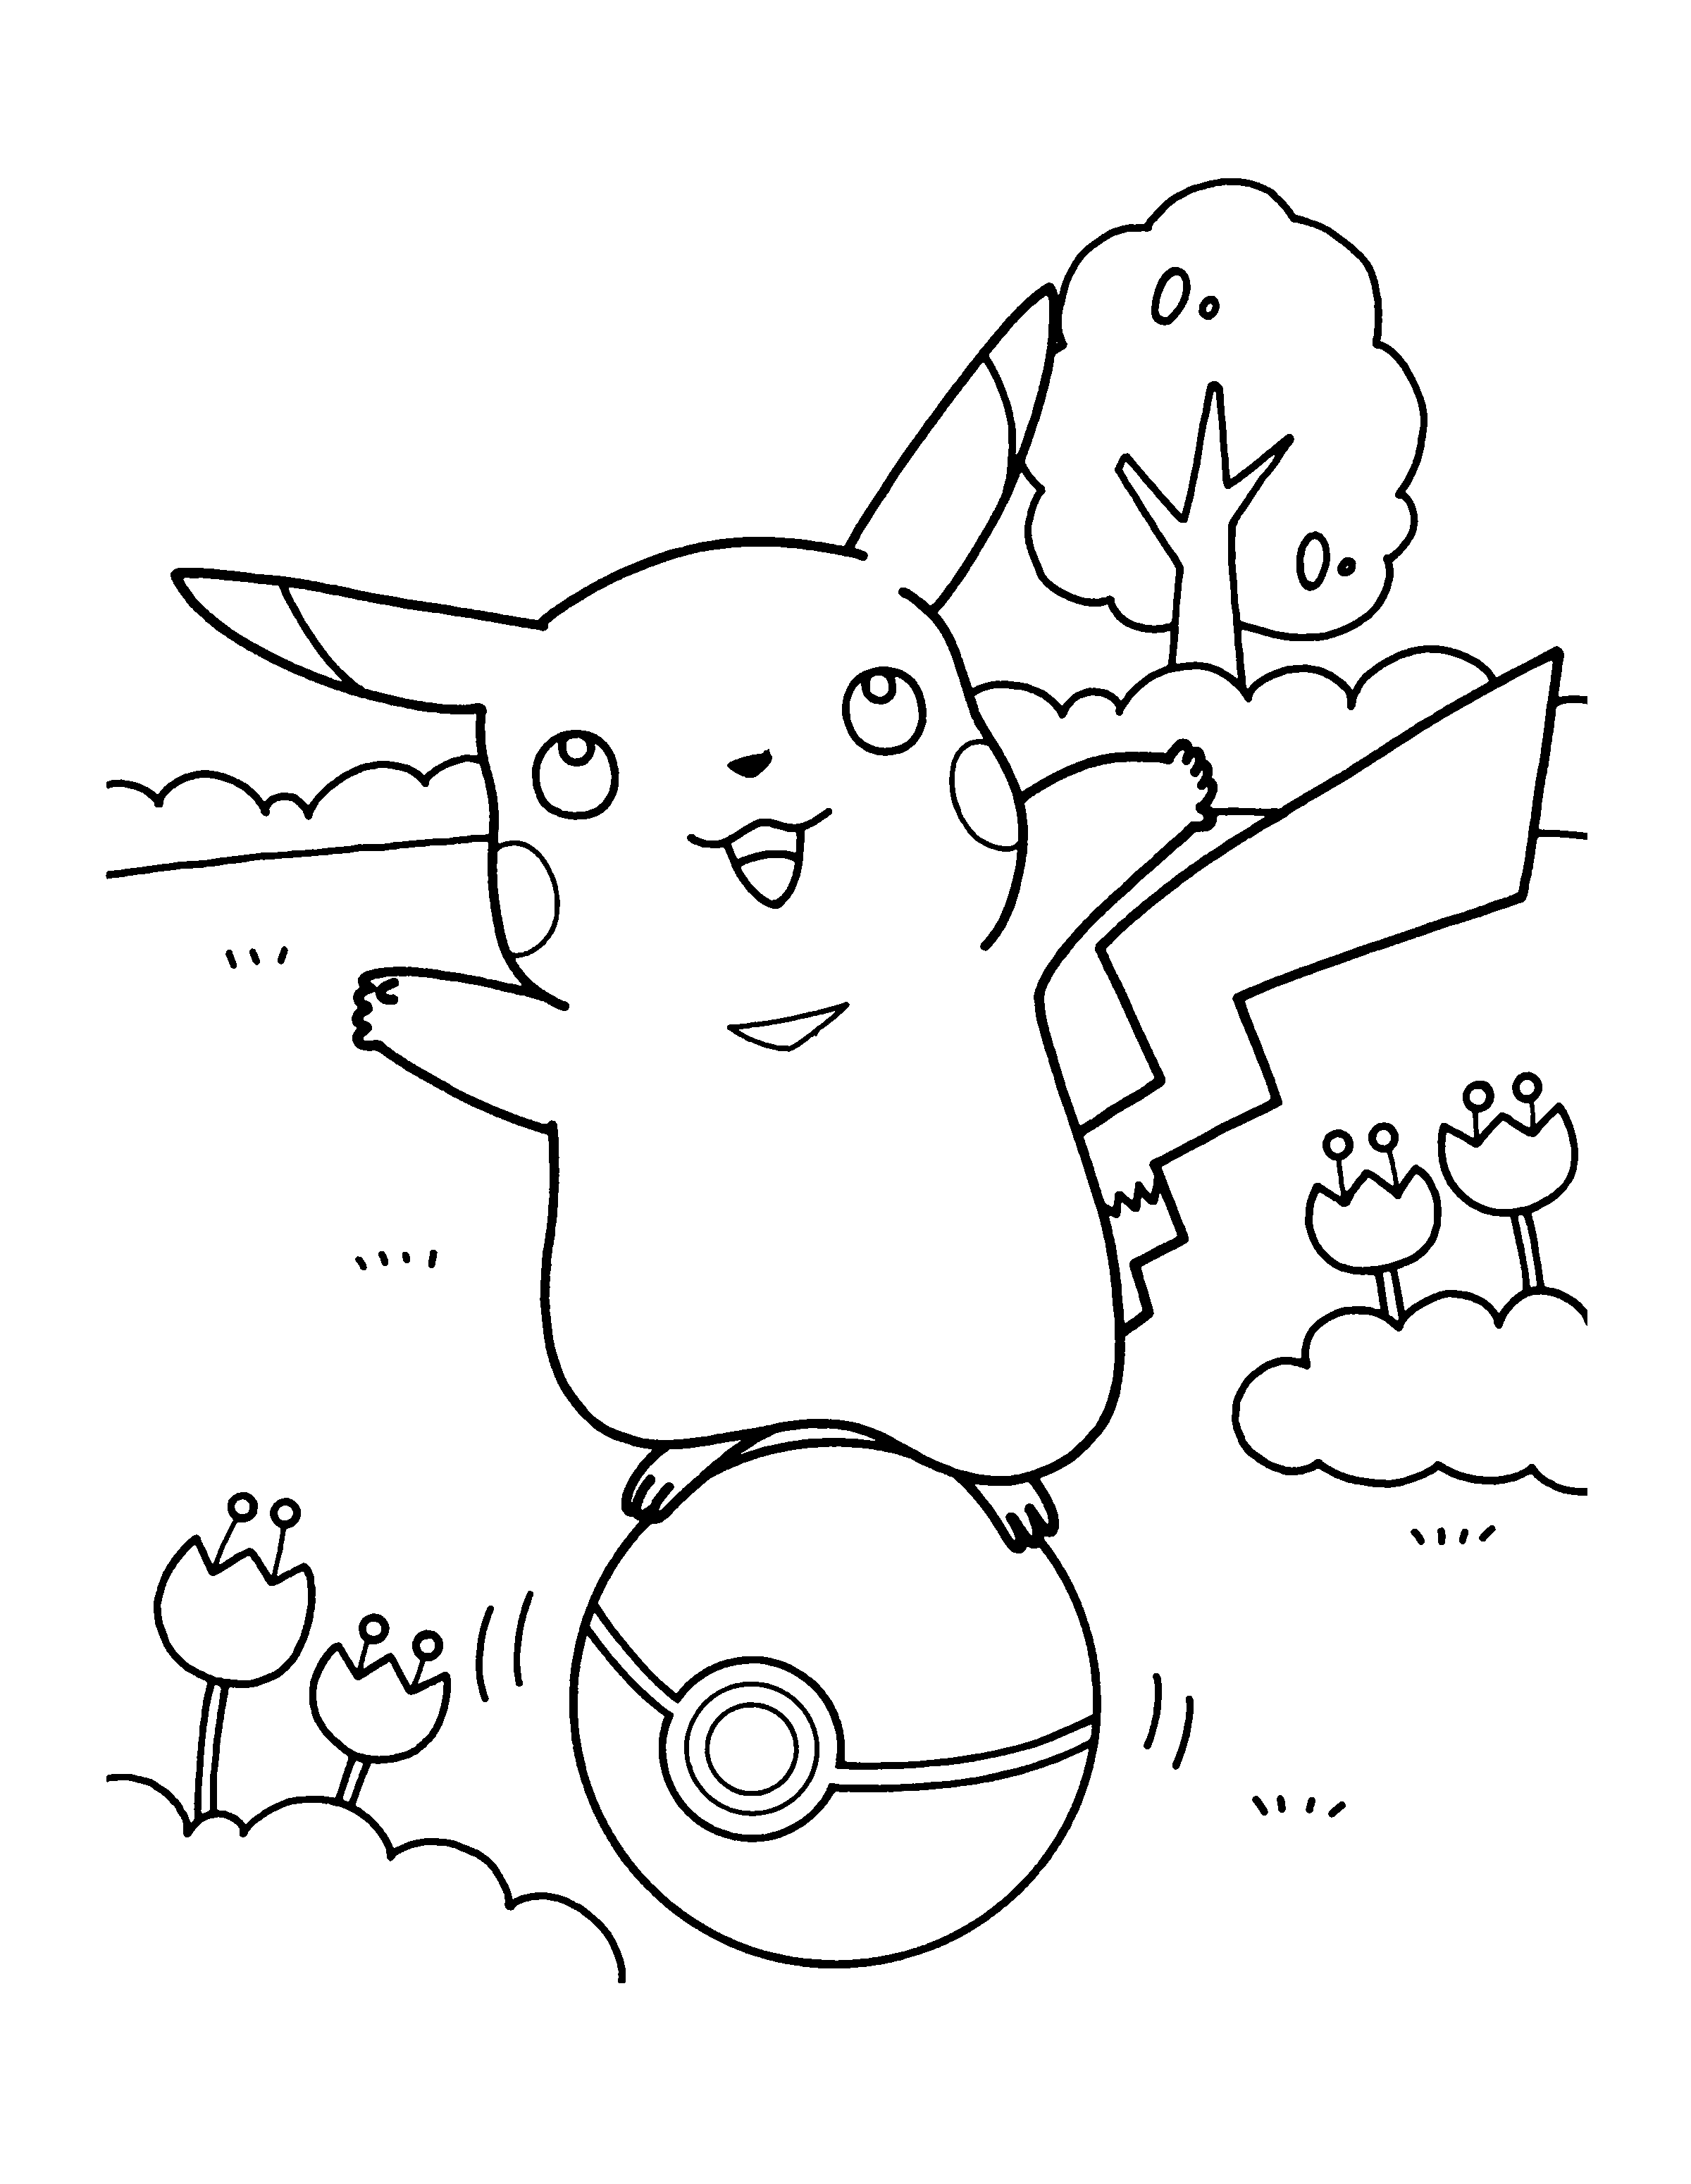 Pikachu On A Pokeball coloring page